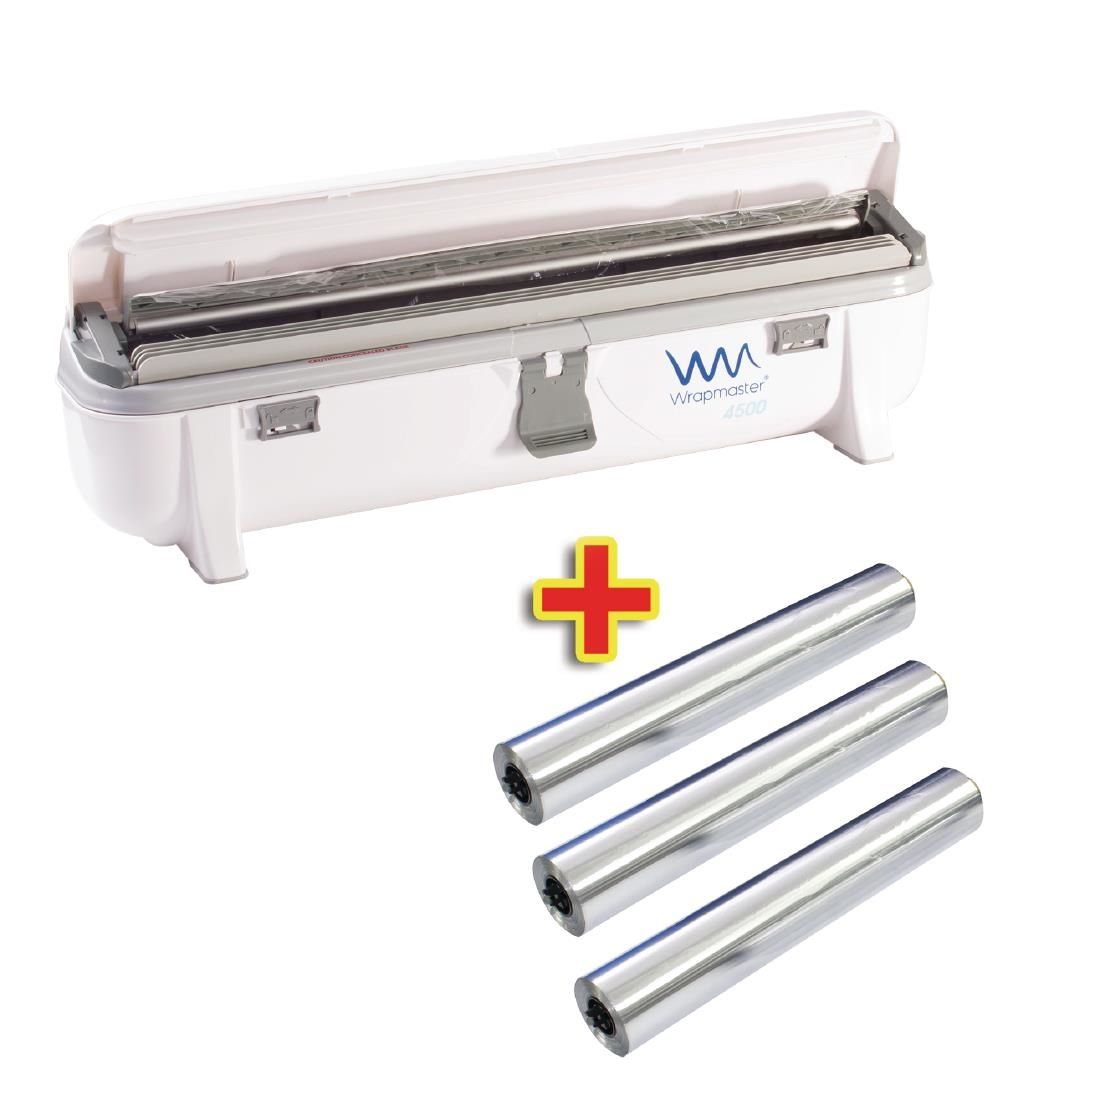 Special Offer Wrapmaster 4500 Dispenser and 3 x 90m Foil